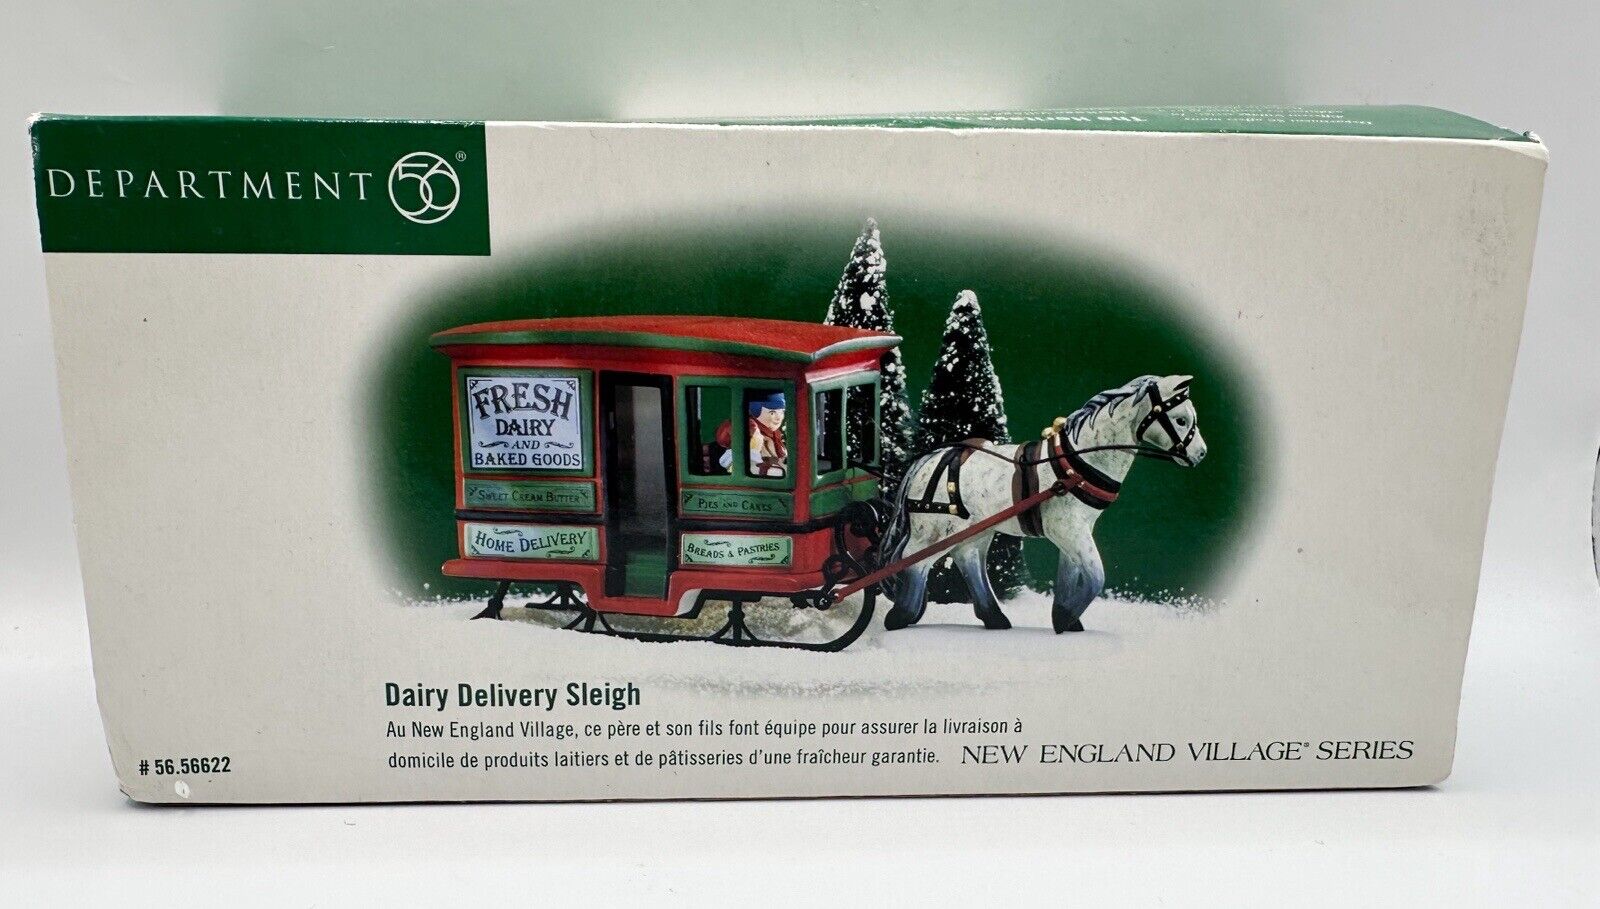 Department Dept 56 New England Village Dairy Delivery Sleigh 56622